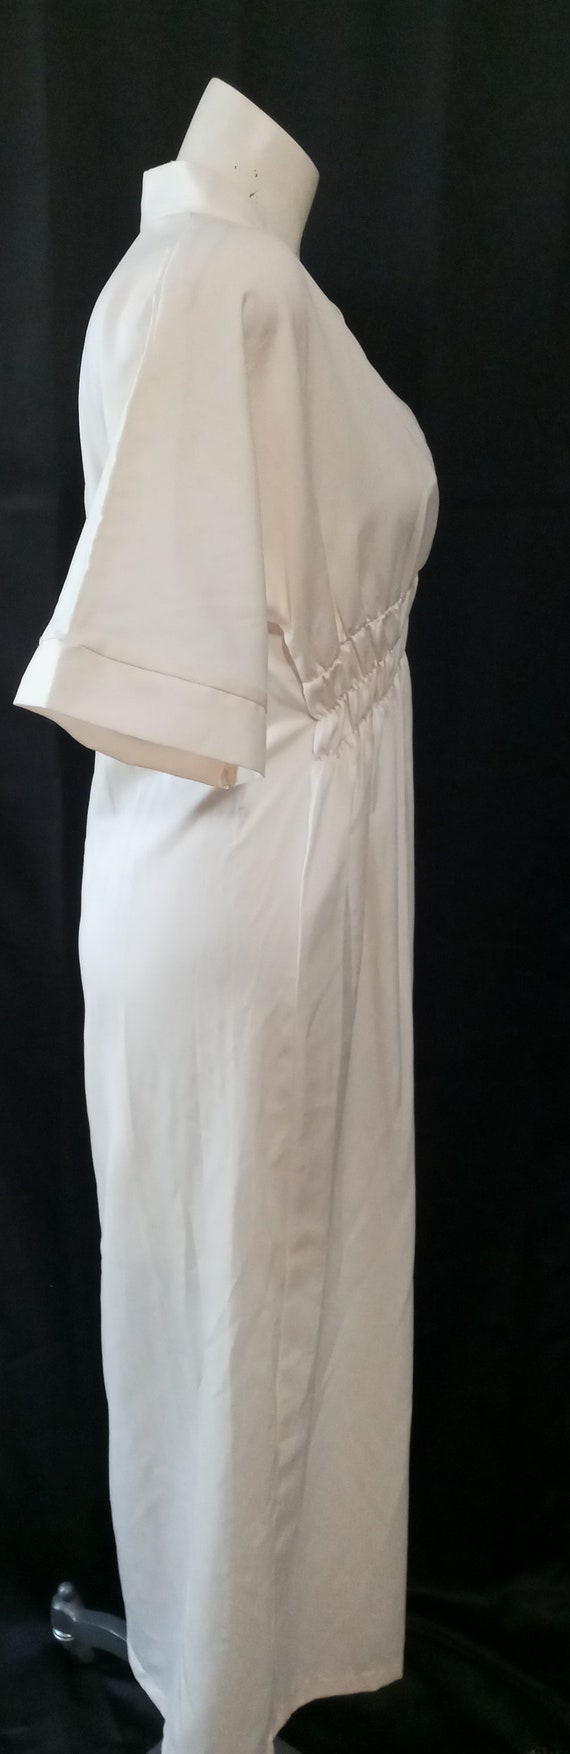 Vintage white night gown - image 8